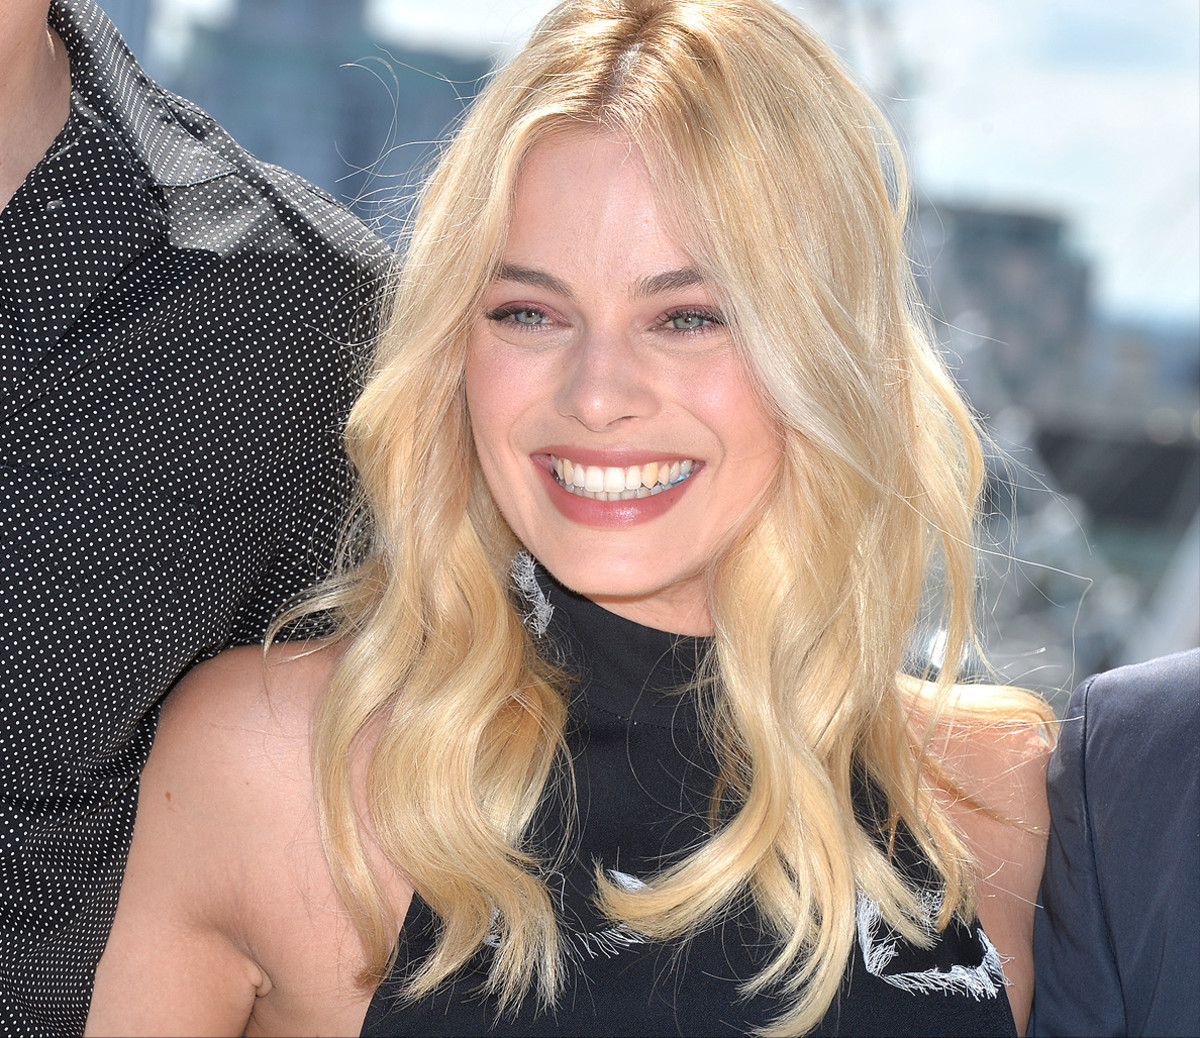 She's Not Just Harley Quinn: Margot Robbie Signs Studio Production Deal  With Warner Bros. - Men's Journal